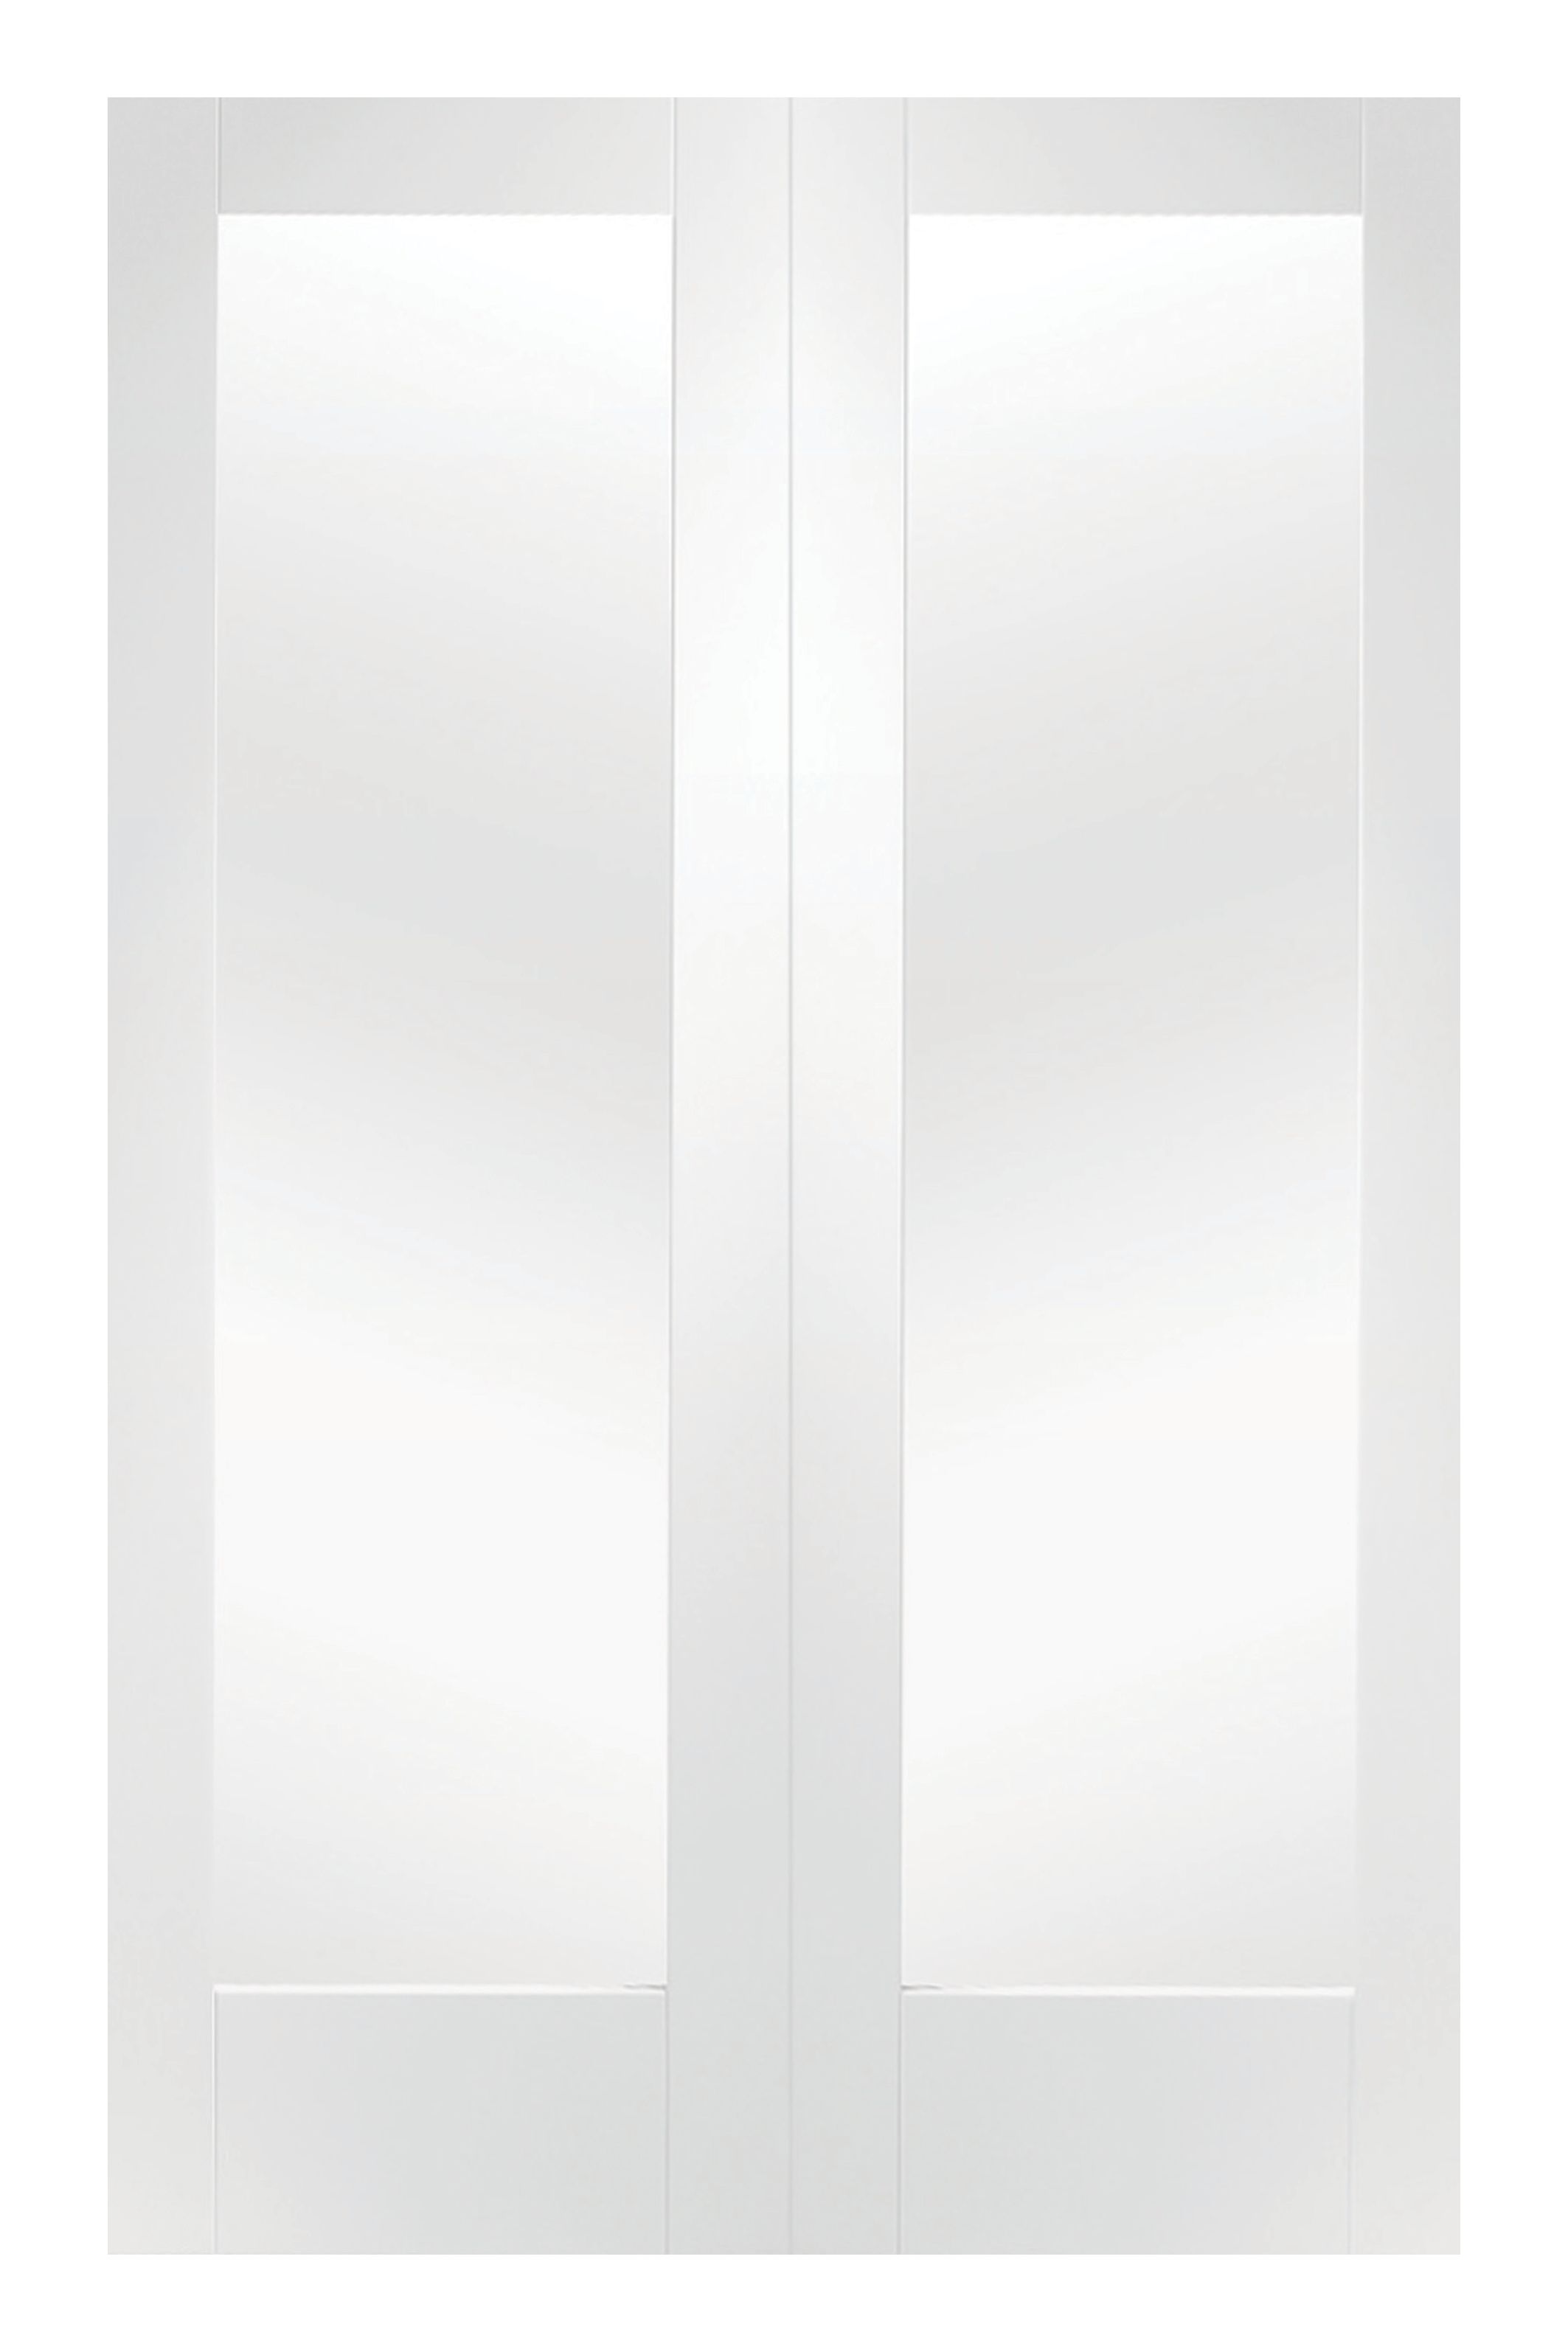 Image of Wickes Fully Glazed MDF Winrow White Rebated Internal French Doors - 1981 x 1168mm